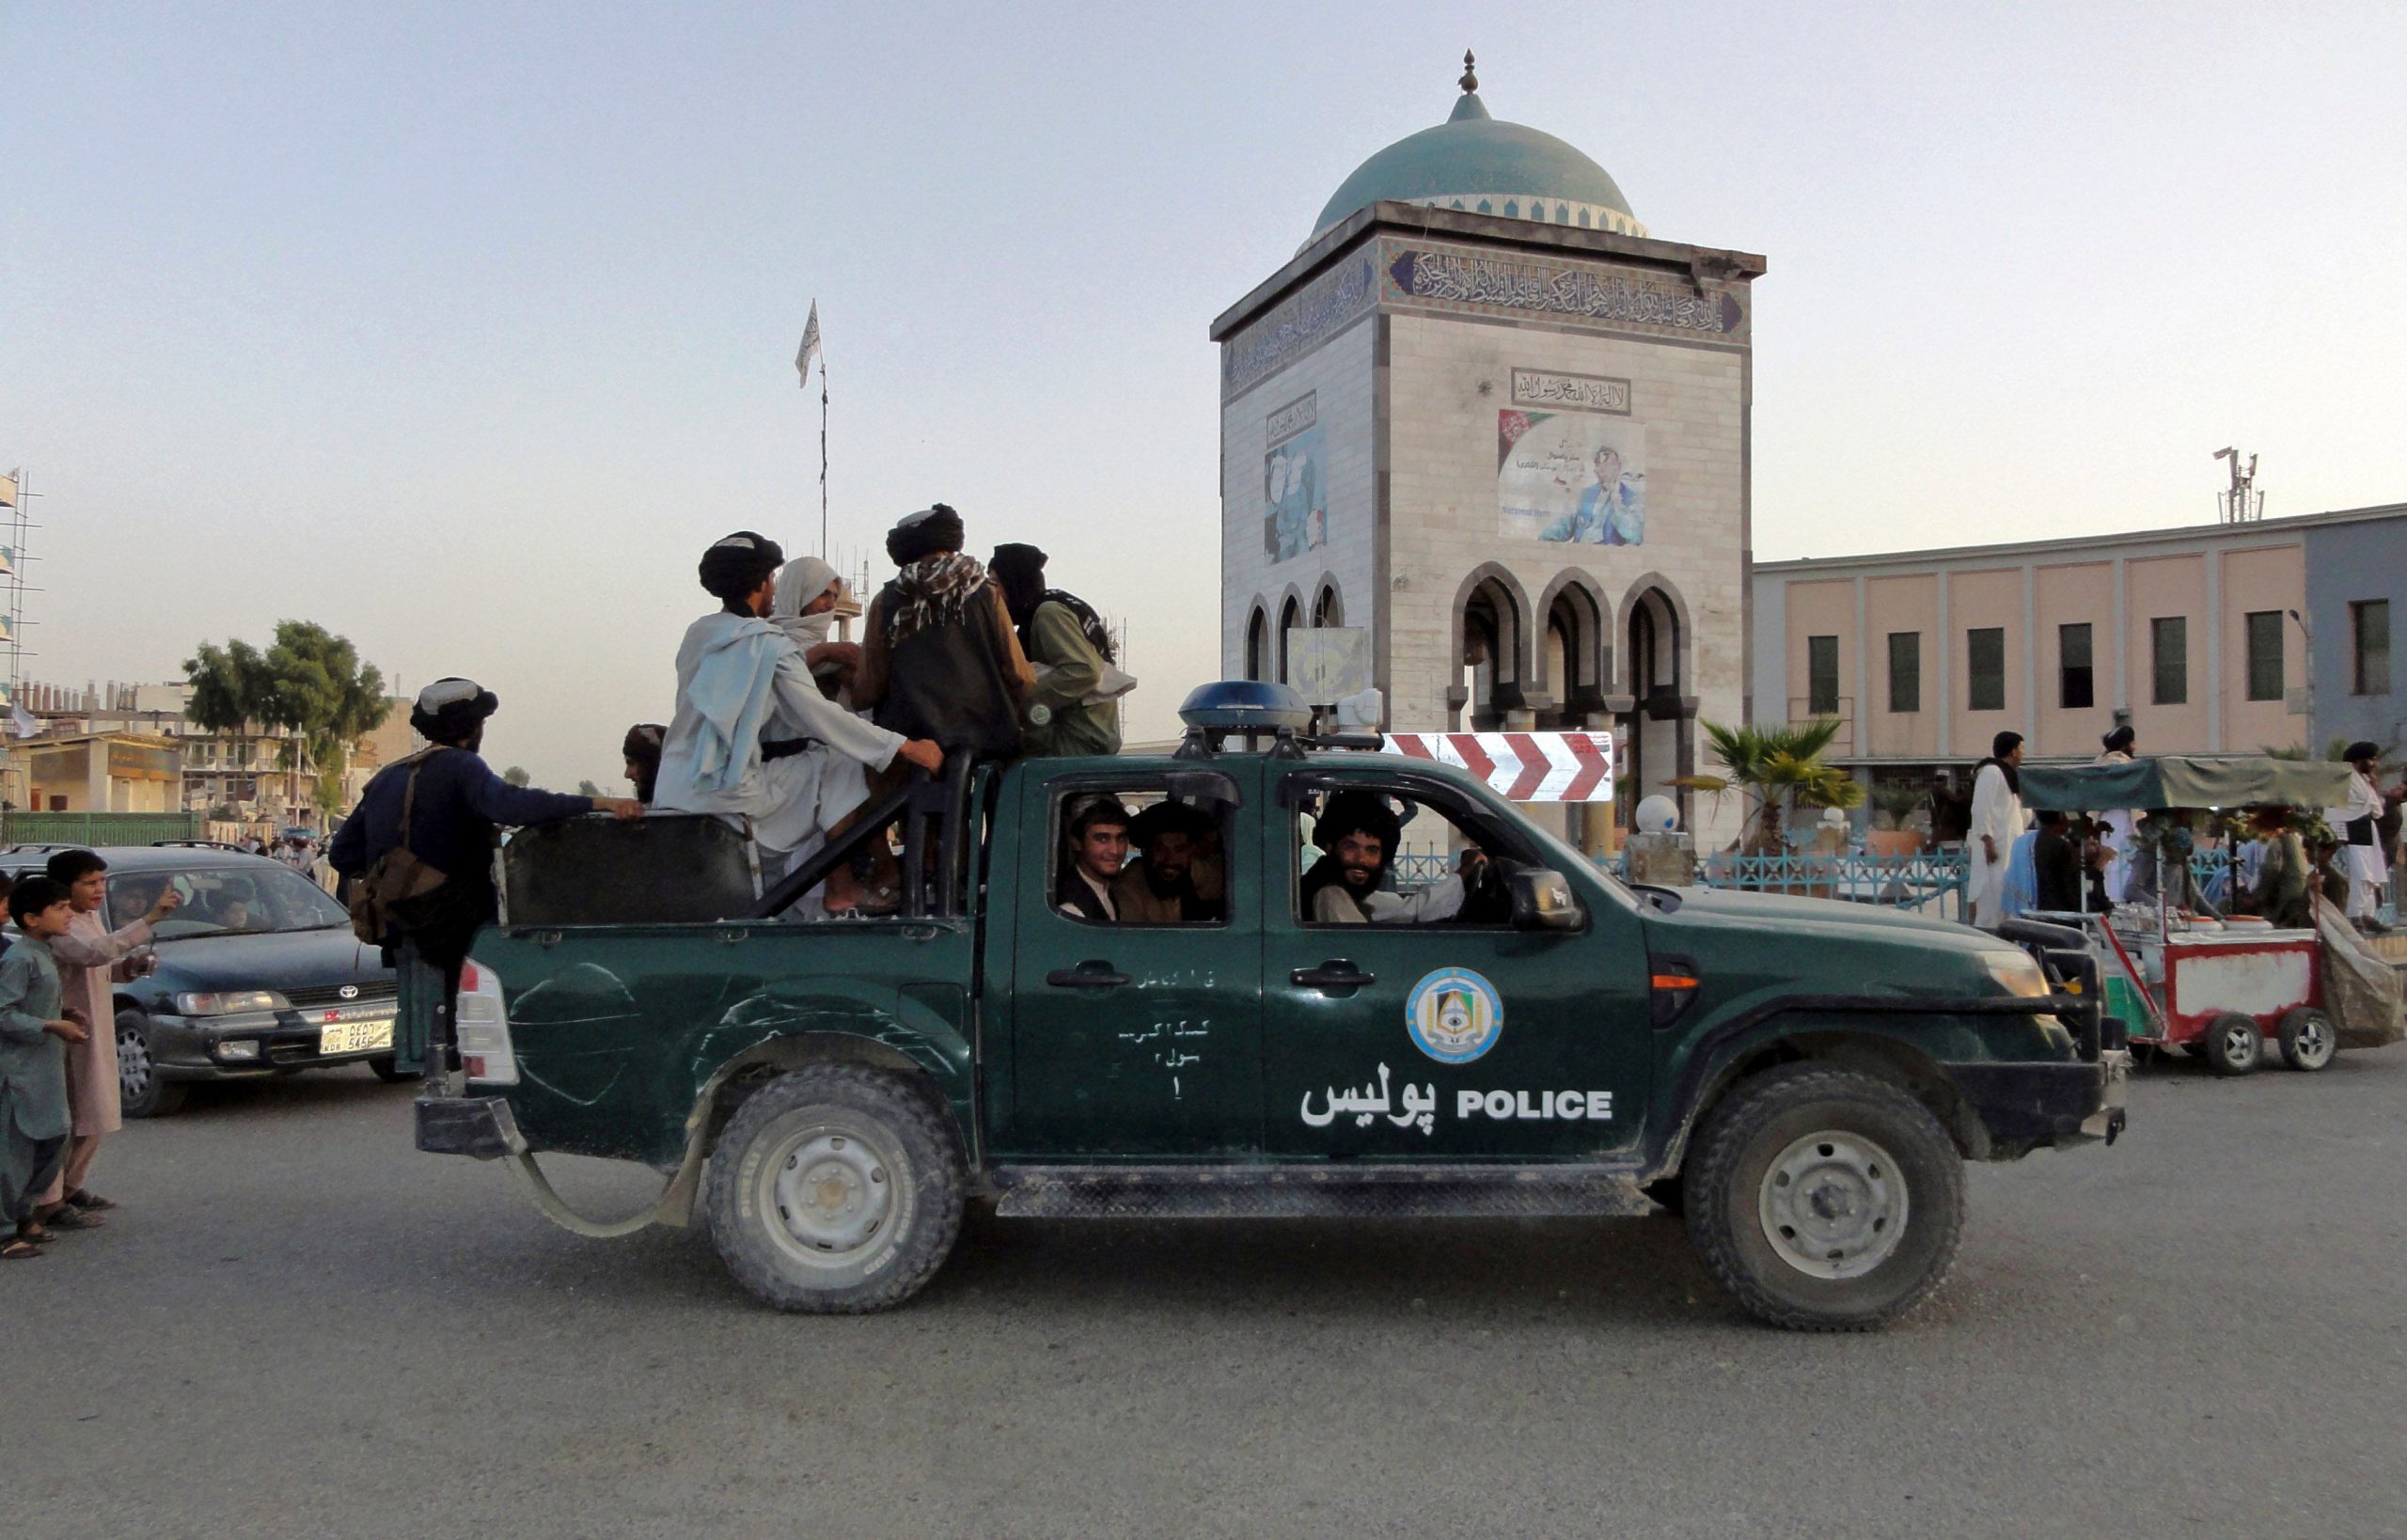 Taliban takes over Kabul: What we know so far